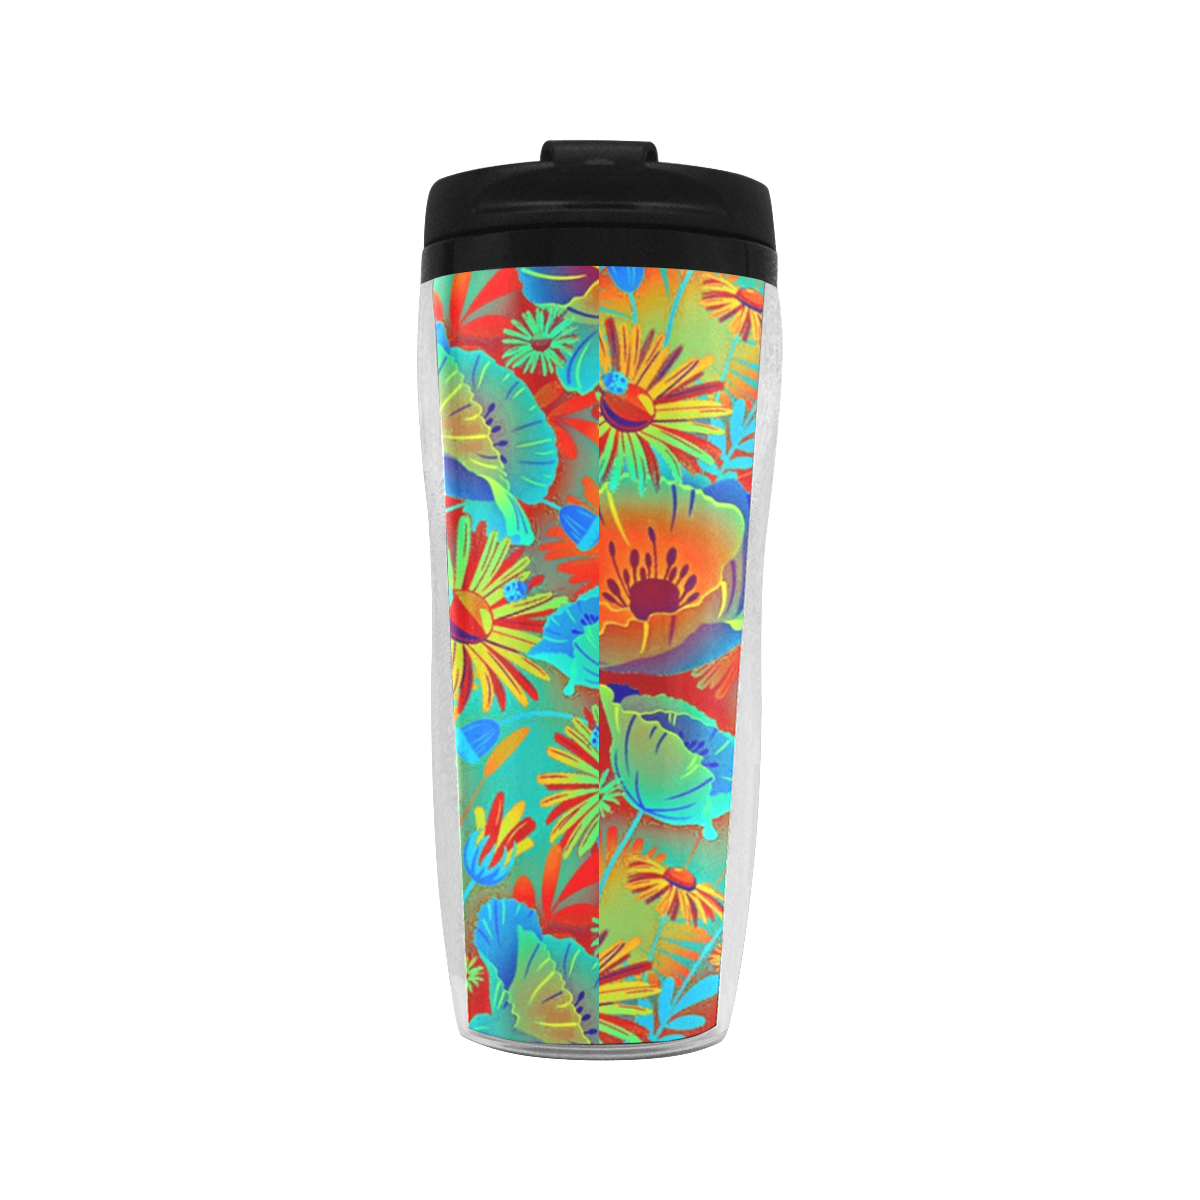 bright tropical floral Reusable Coffee Cup (11.8oz)